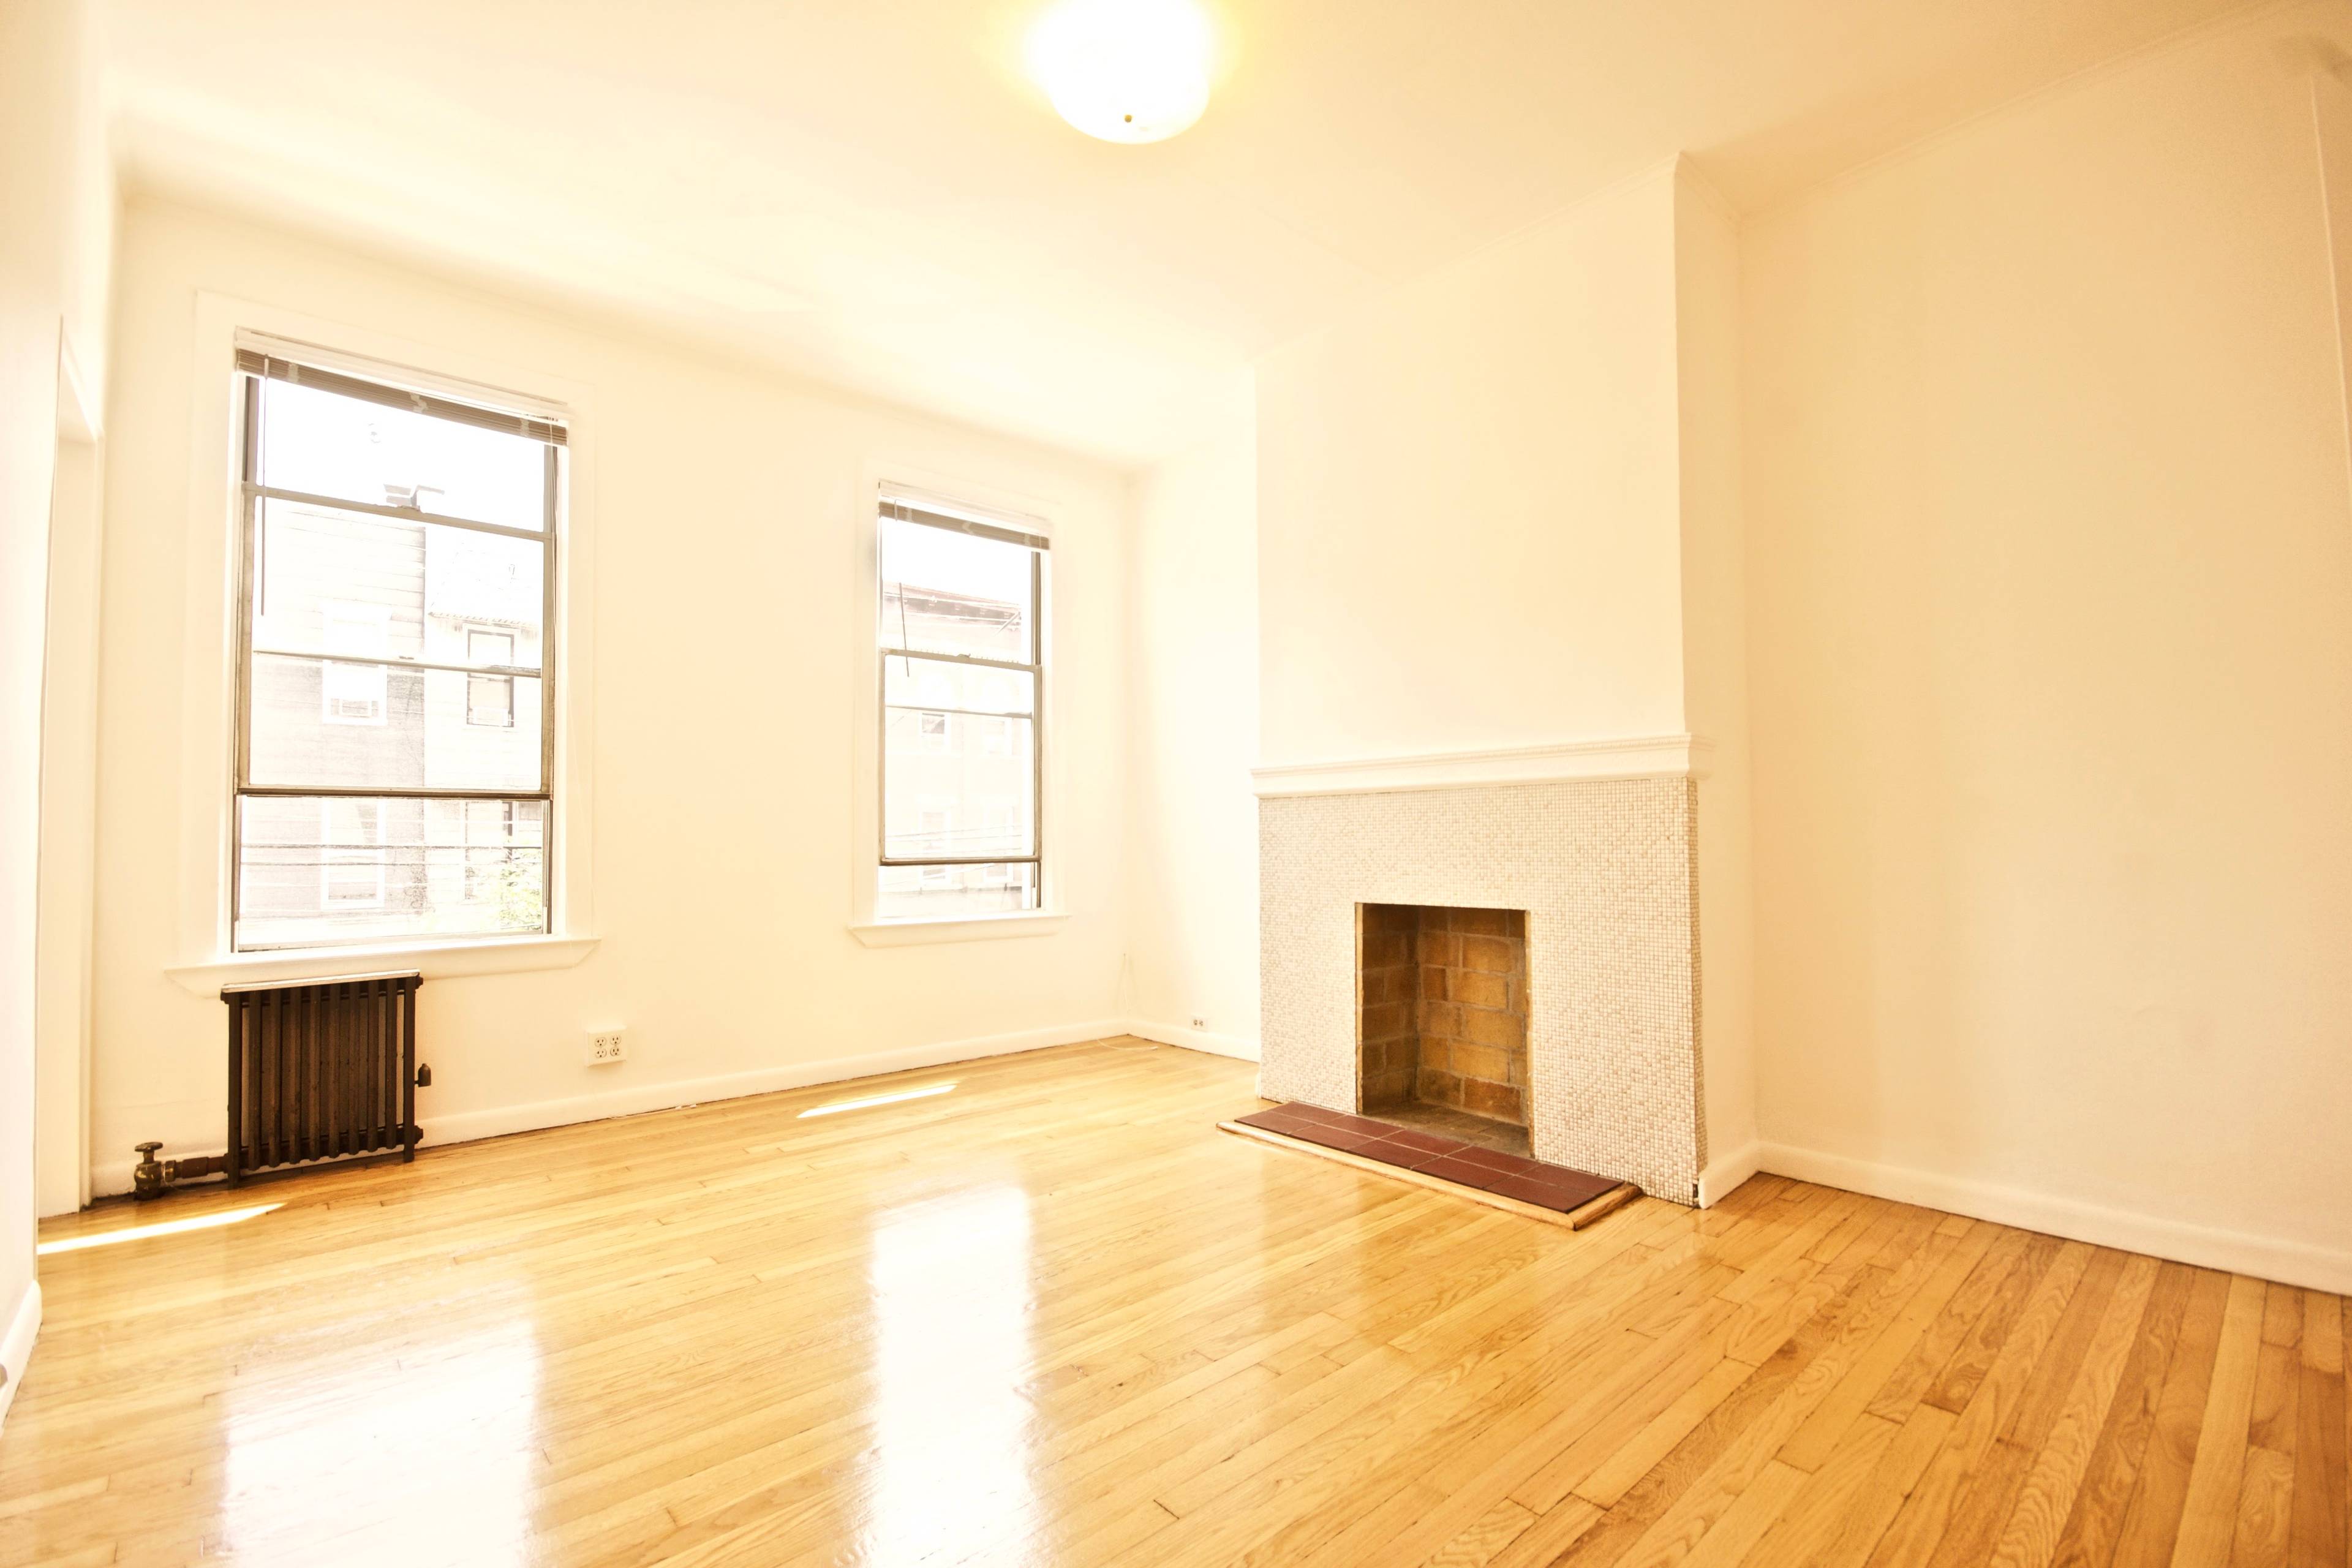 FULL FLOOR, 6 ROOM APARTMENT, AS BIG AS A HOUSE IN GORGEOUS GREENPOINT!